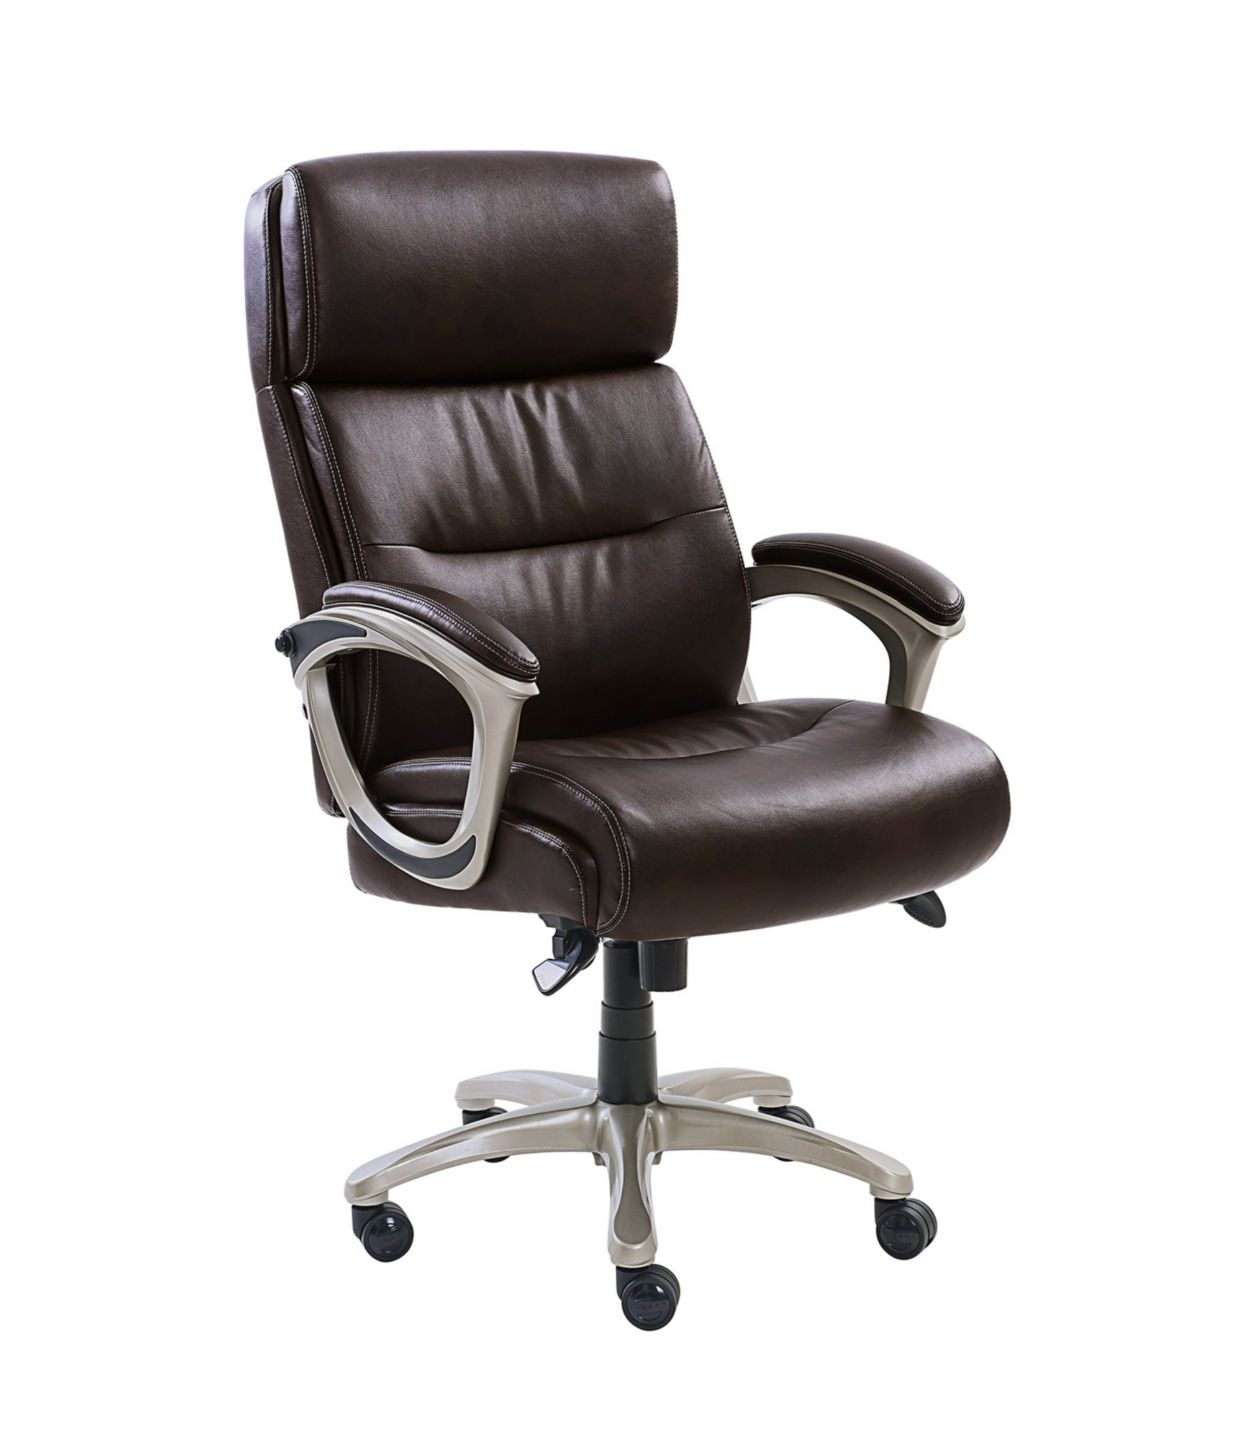 The Varnell La-Z-Boy Executive Chair- new